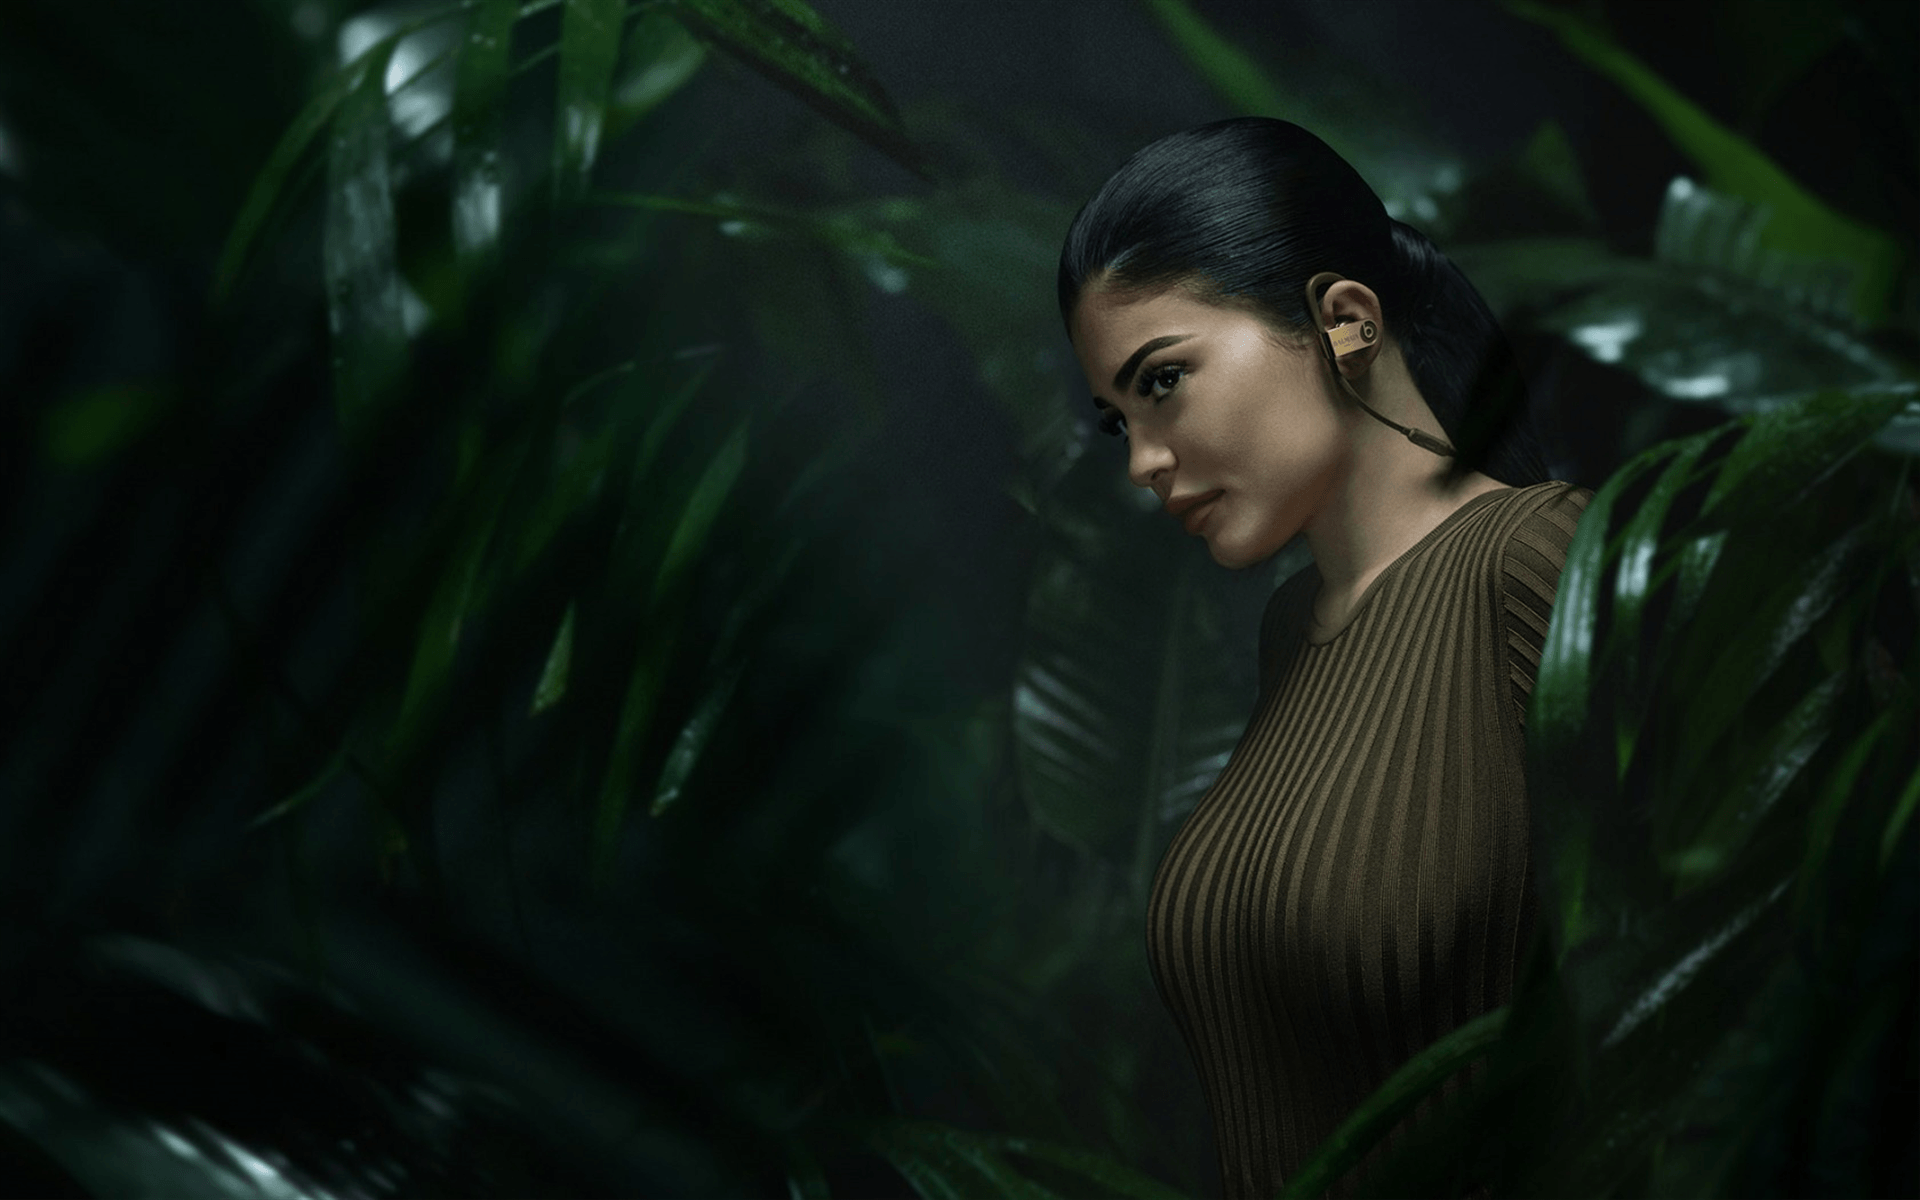 Download wallpaper Kylie Jenner, woman in the forest, jungle, american model, brunette, beautiful woman for desktop with resolution 1920x1200. High Quality HD picture wallpaper